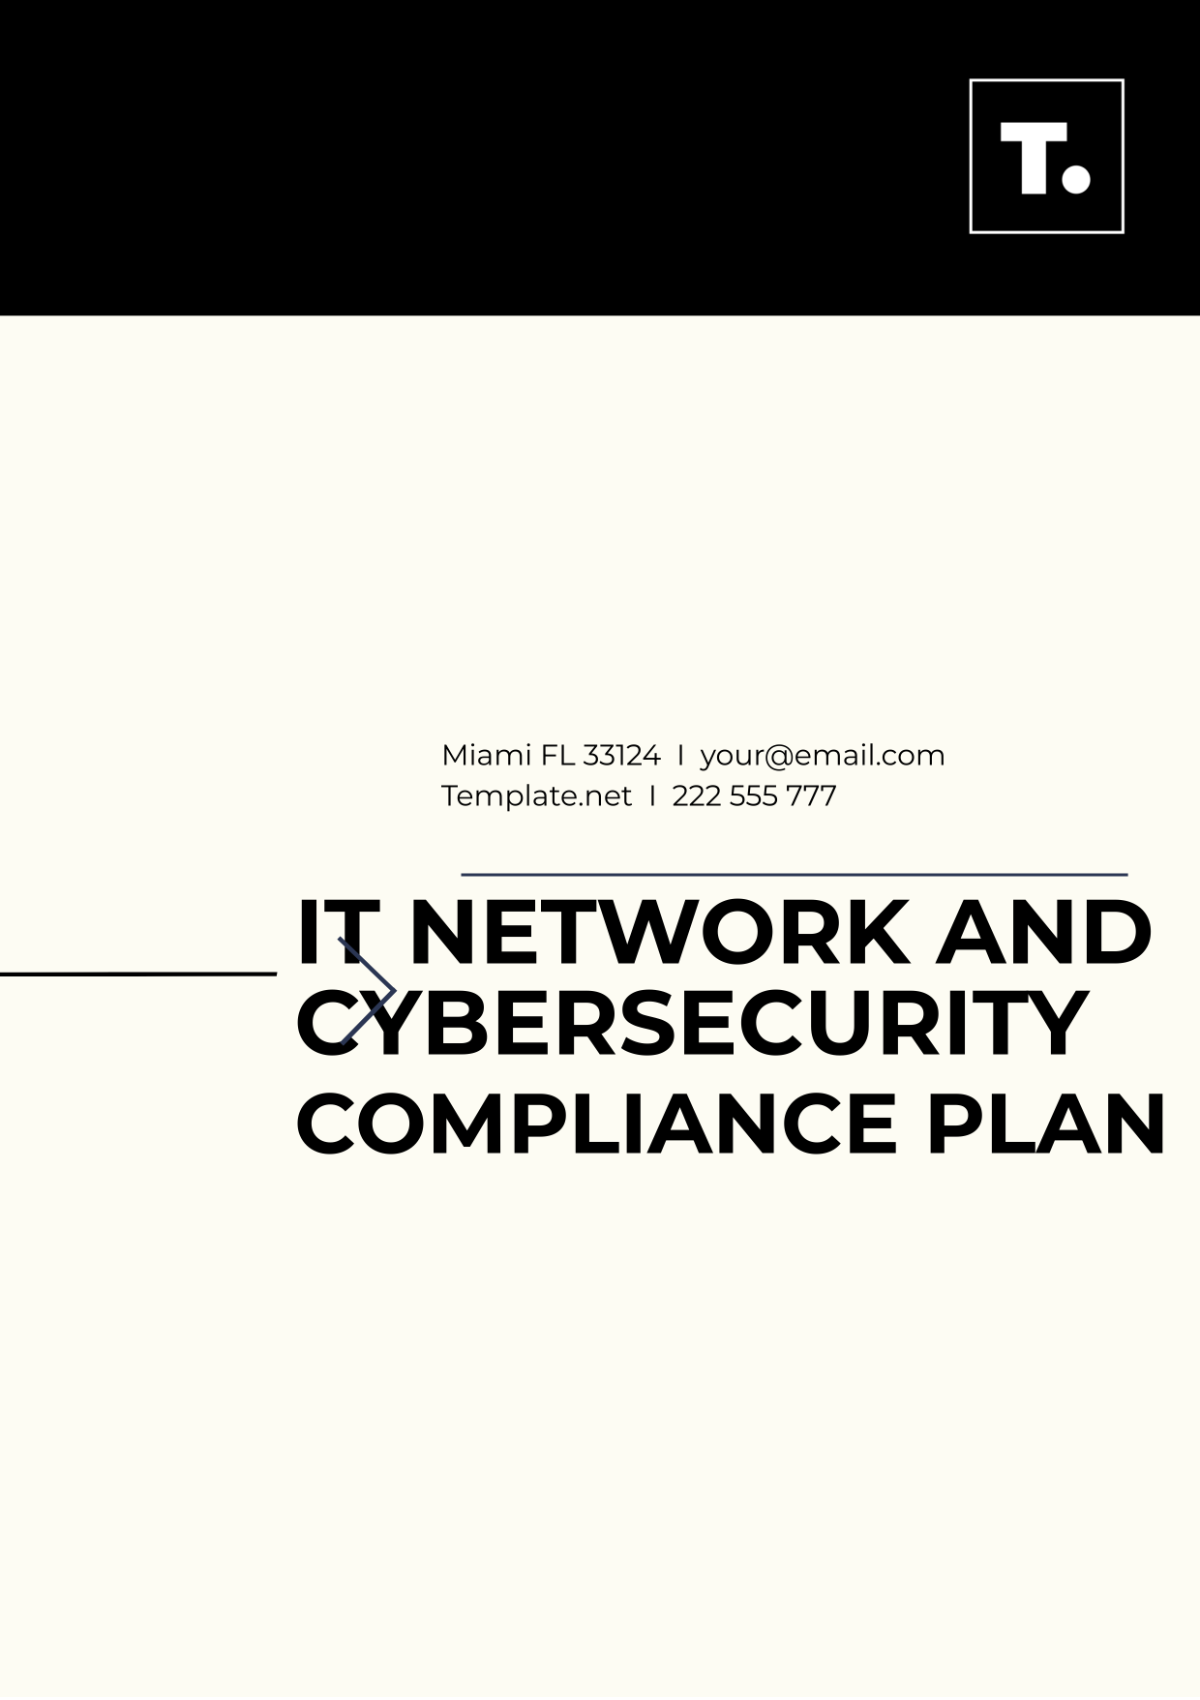 Free IT Network And Cybersecurity Compliance Plan Template